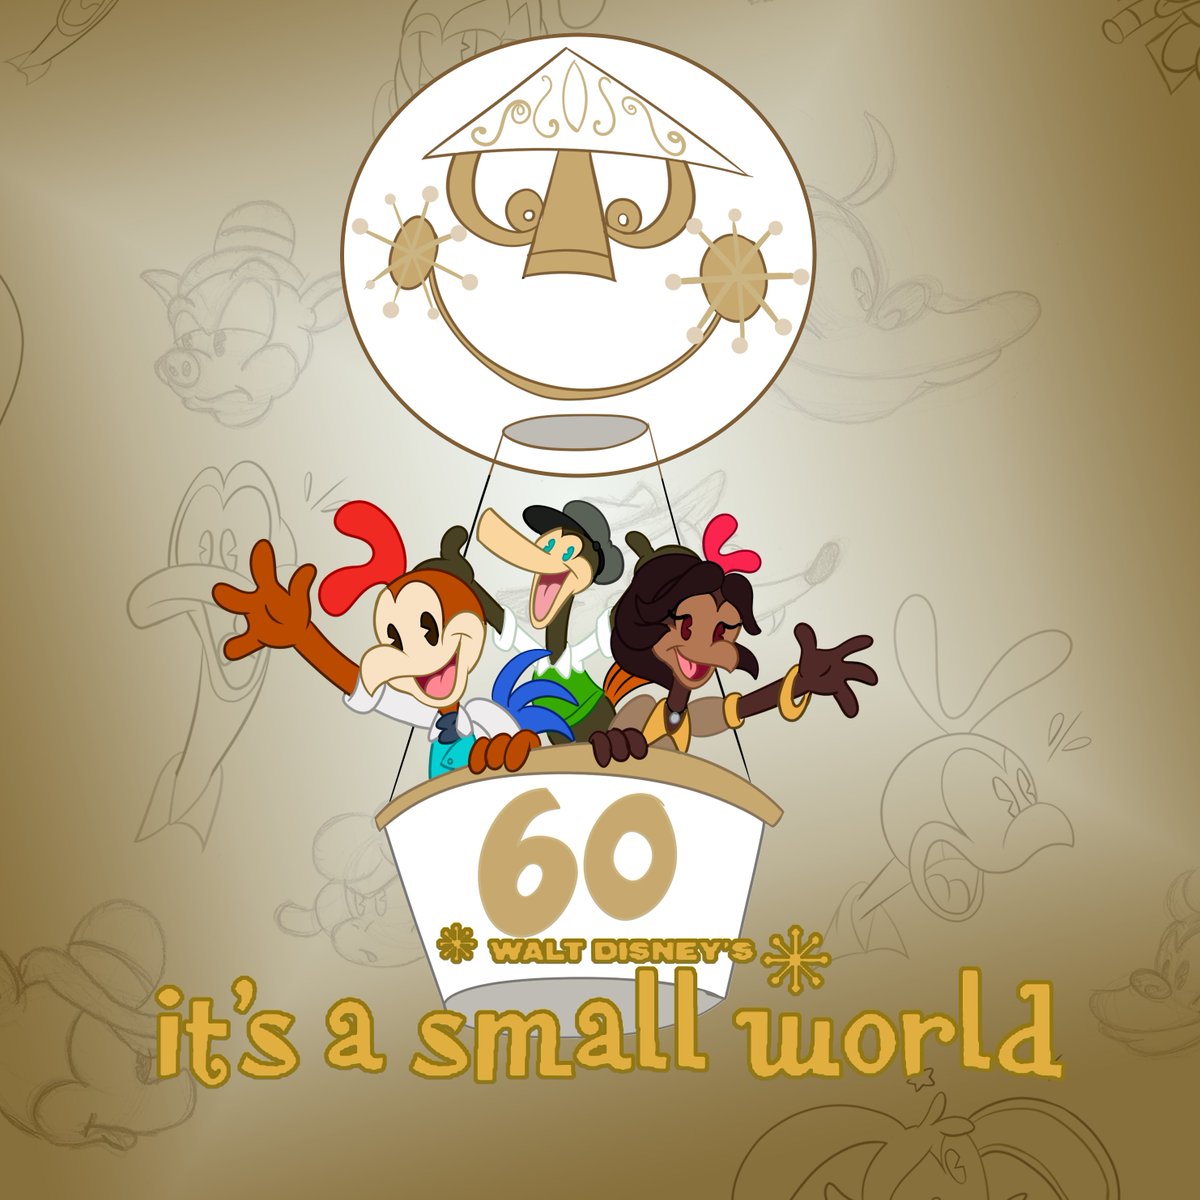 Happy 60th Birthday to Walt Disney's It's a Small World, which premiered as part of the New York World's Fair today back in 1964! 
#chuckychicken #disneyland #smallworld #newyorkworldsfair #indieanimation #EarWorm